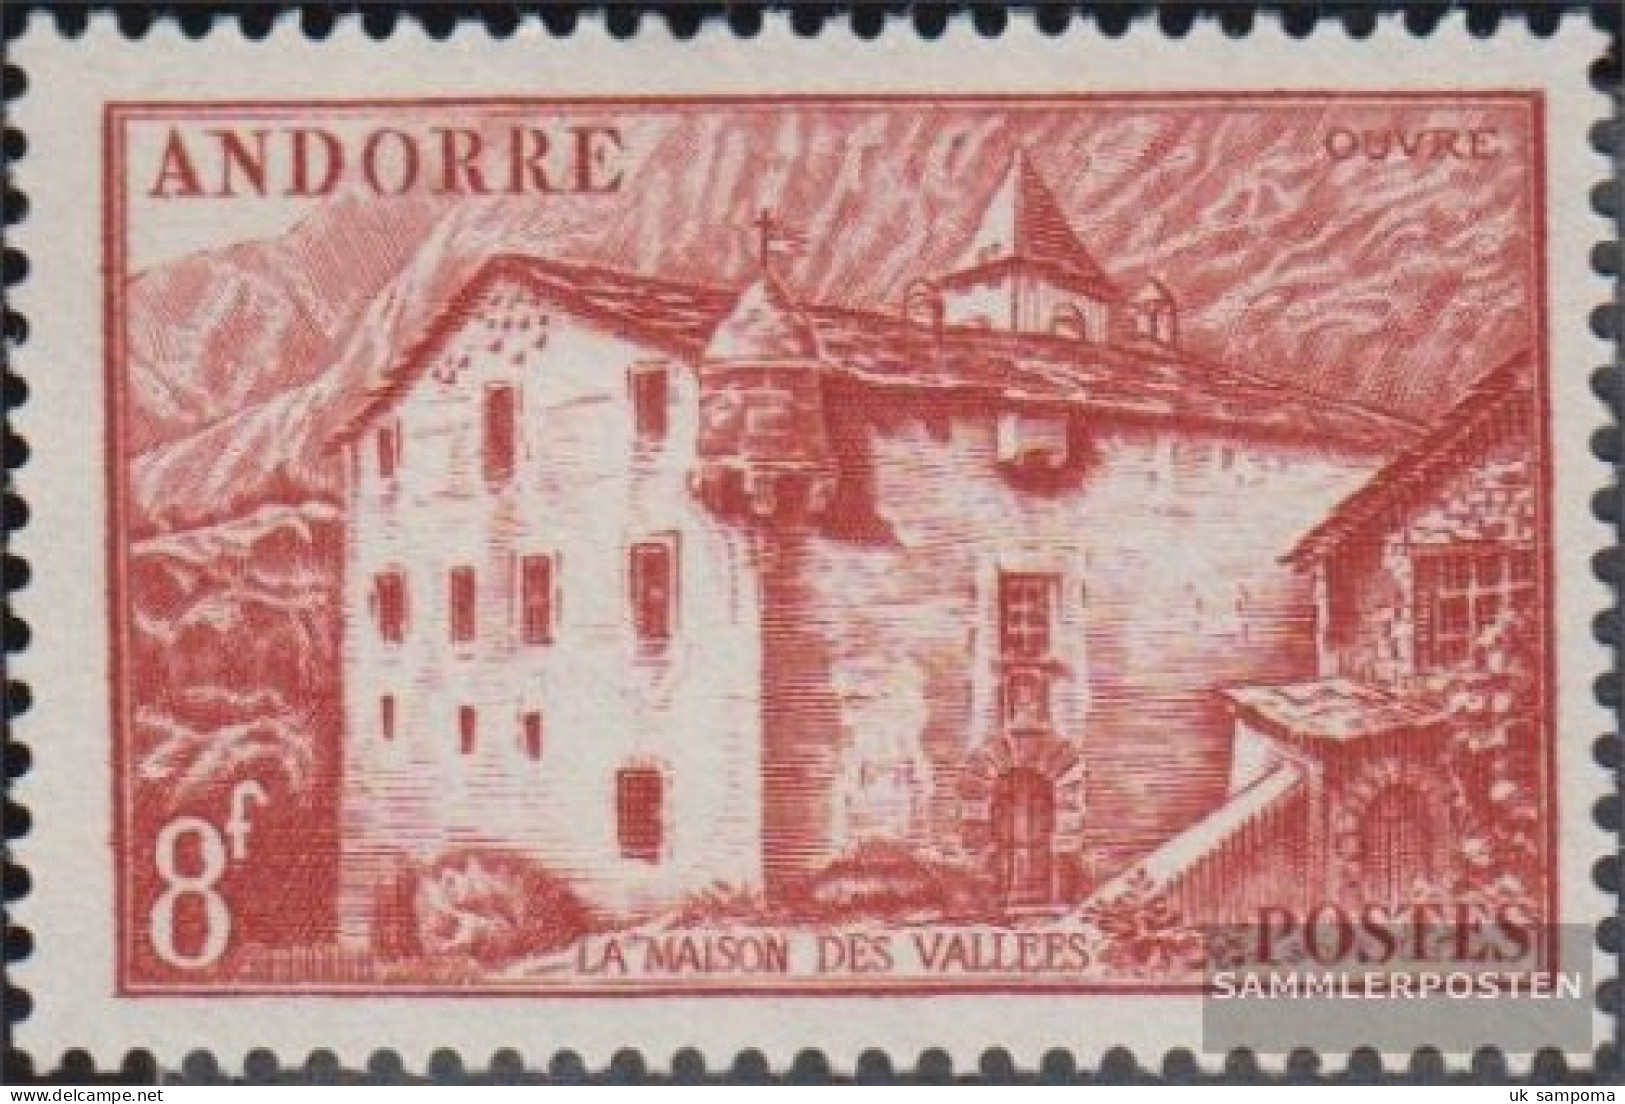 Andorra - French Post 124 Unmounted Mint / Never Hinged 1944 Landscapes - Booklets